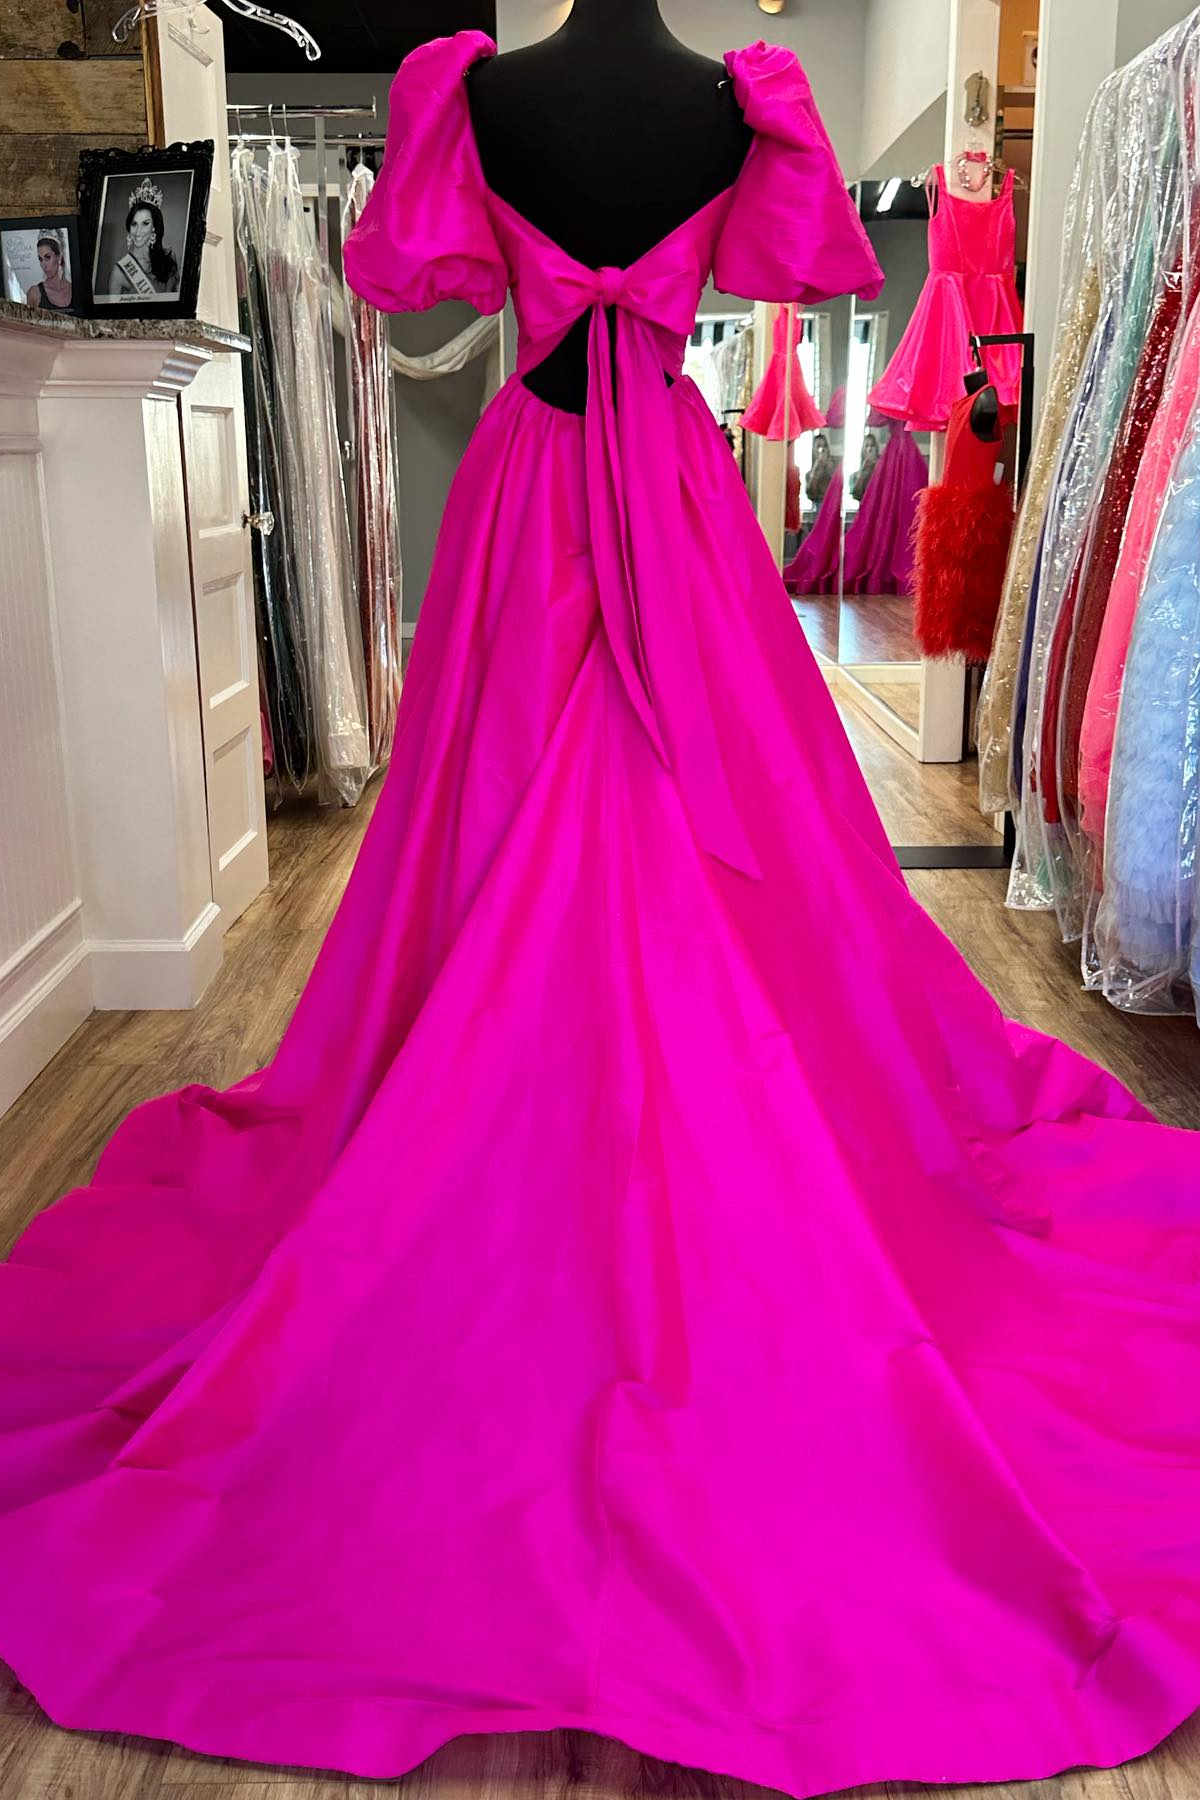 Dress To Impression, Square Neck Fuchsia Puff Sleeves A-Line Prom Dress